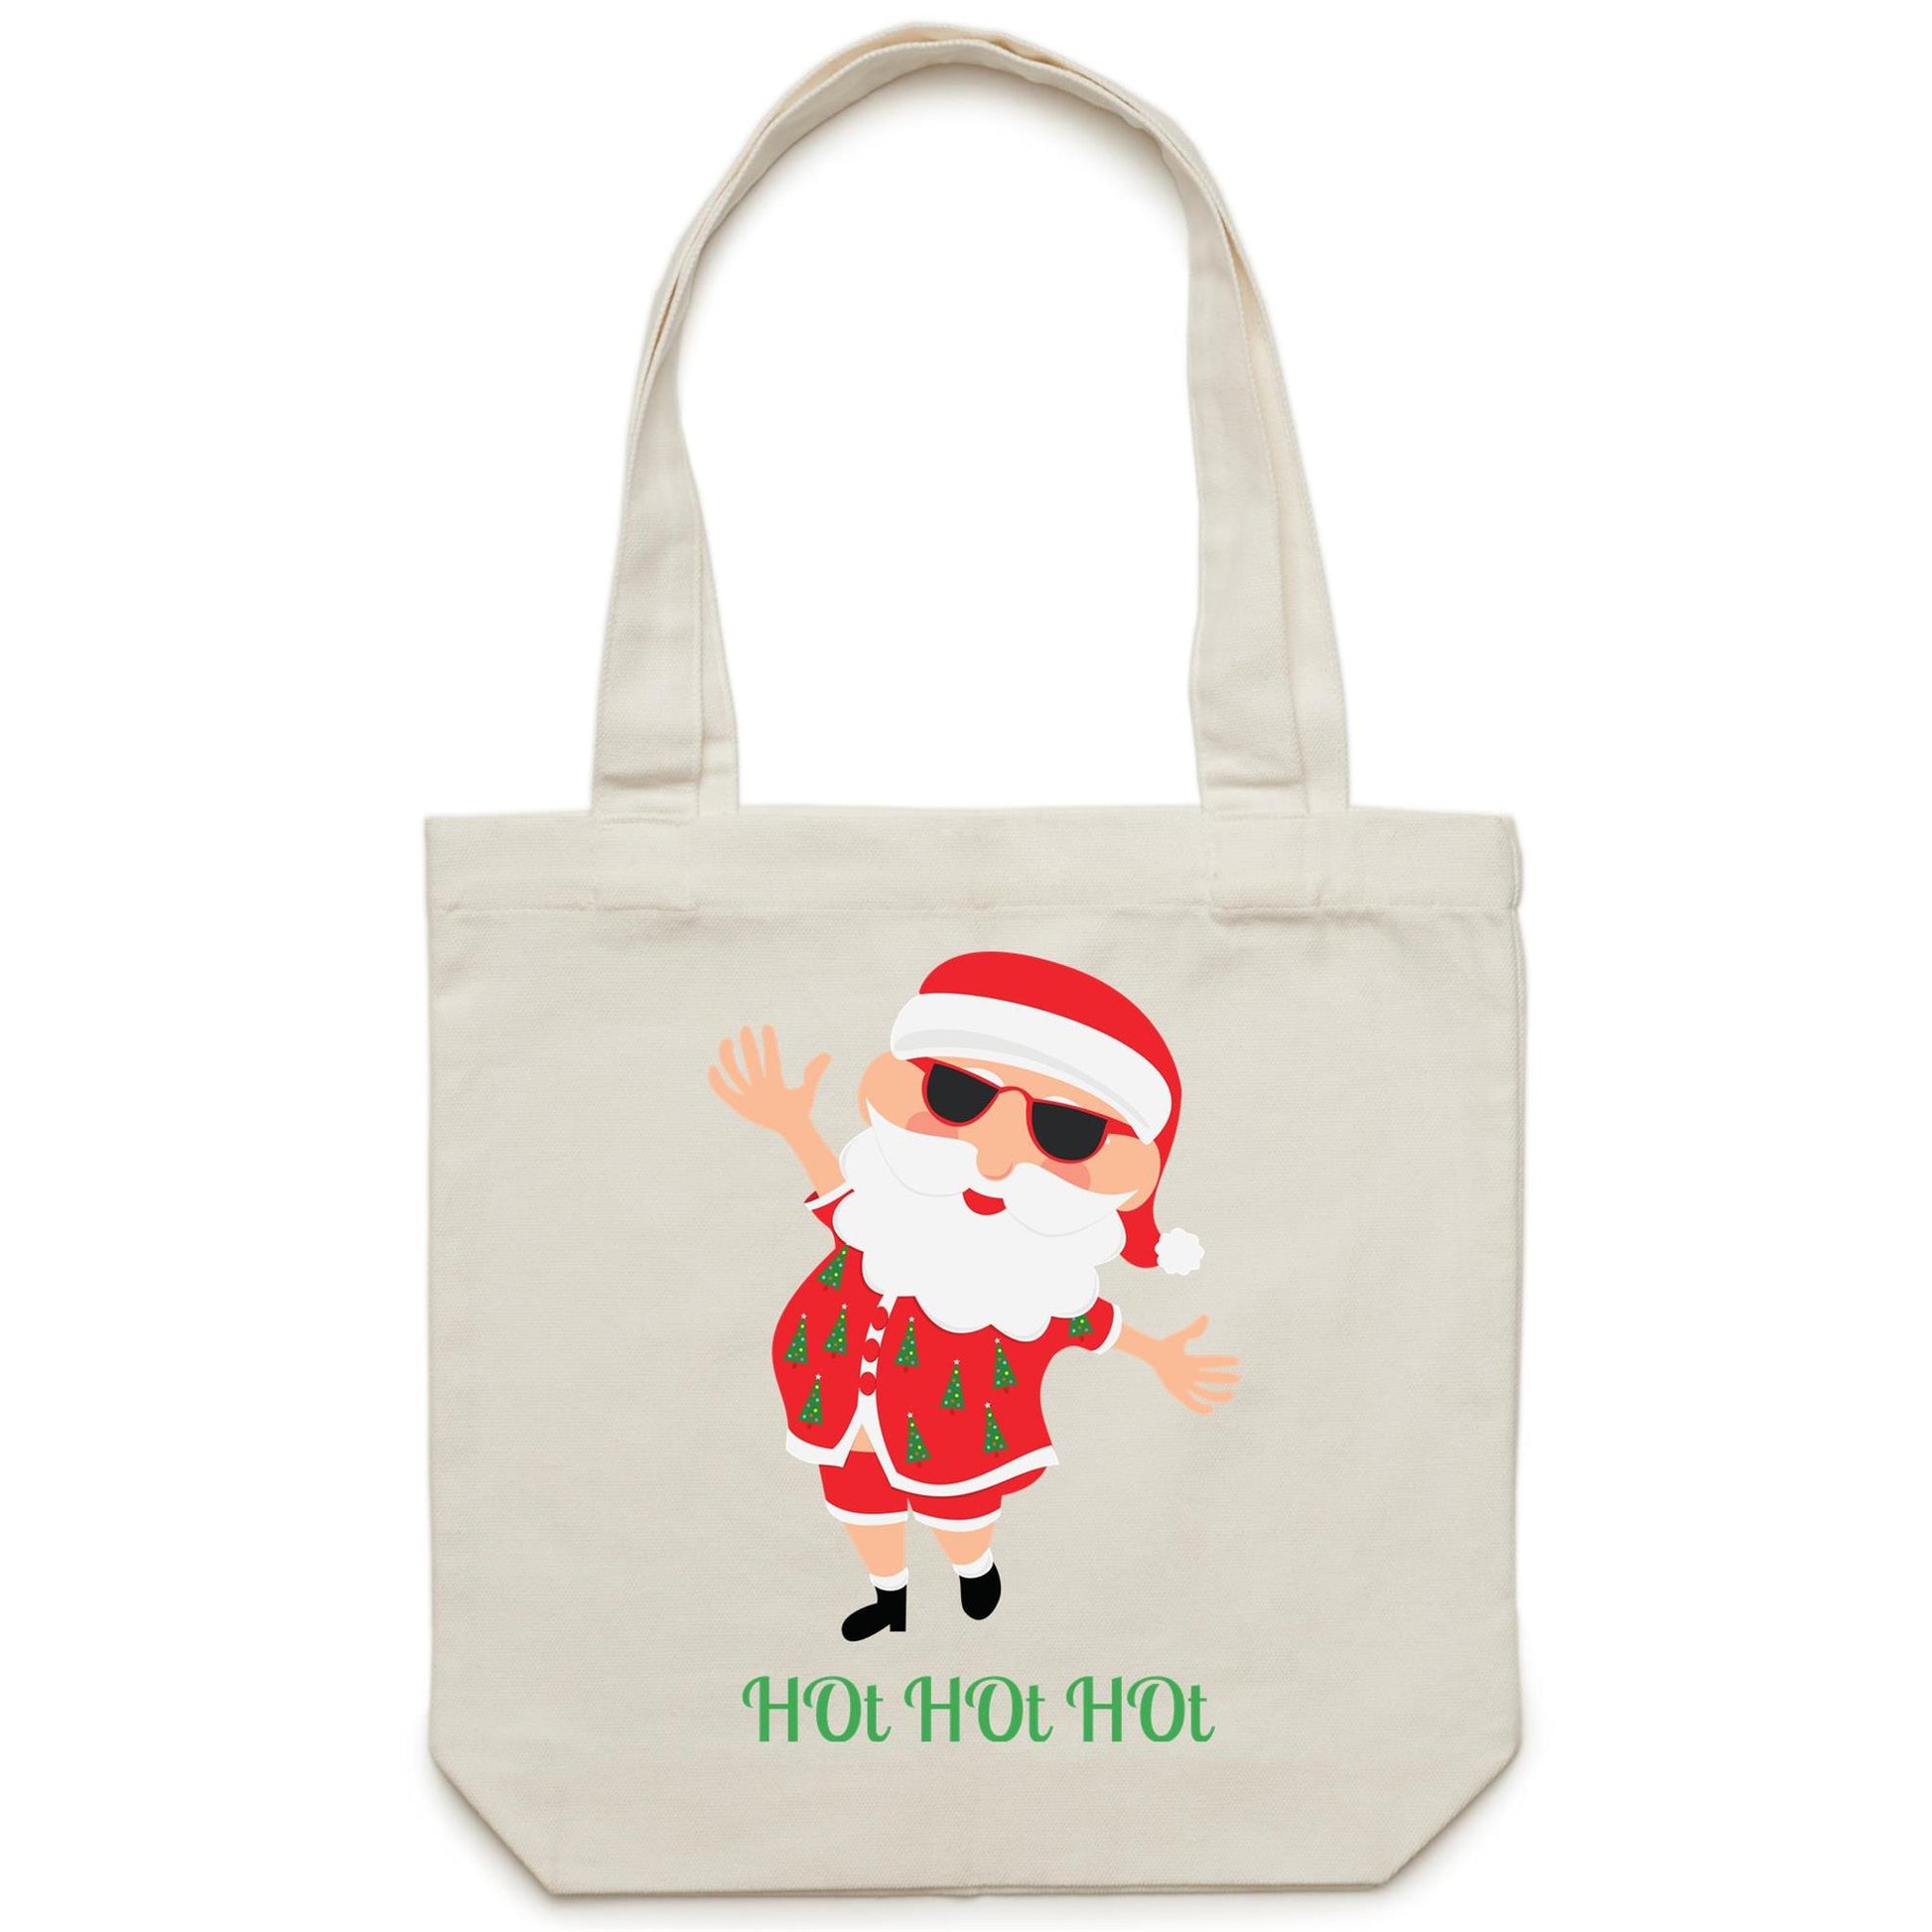 HOt HOt HOt - Canvas Tote Bag Cream One Size Christmas Tote Bag Merry Christmas